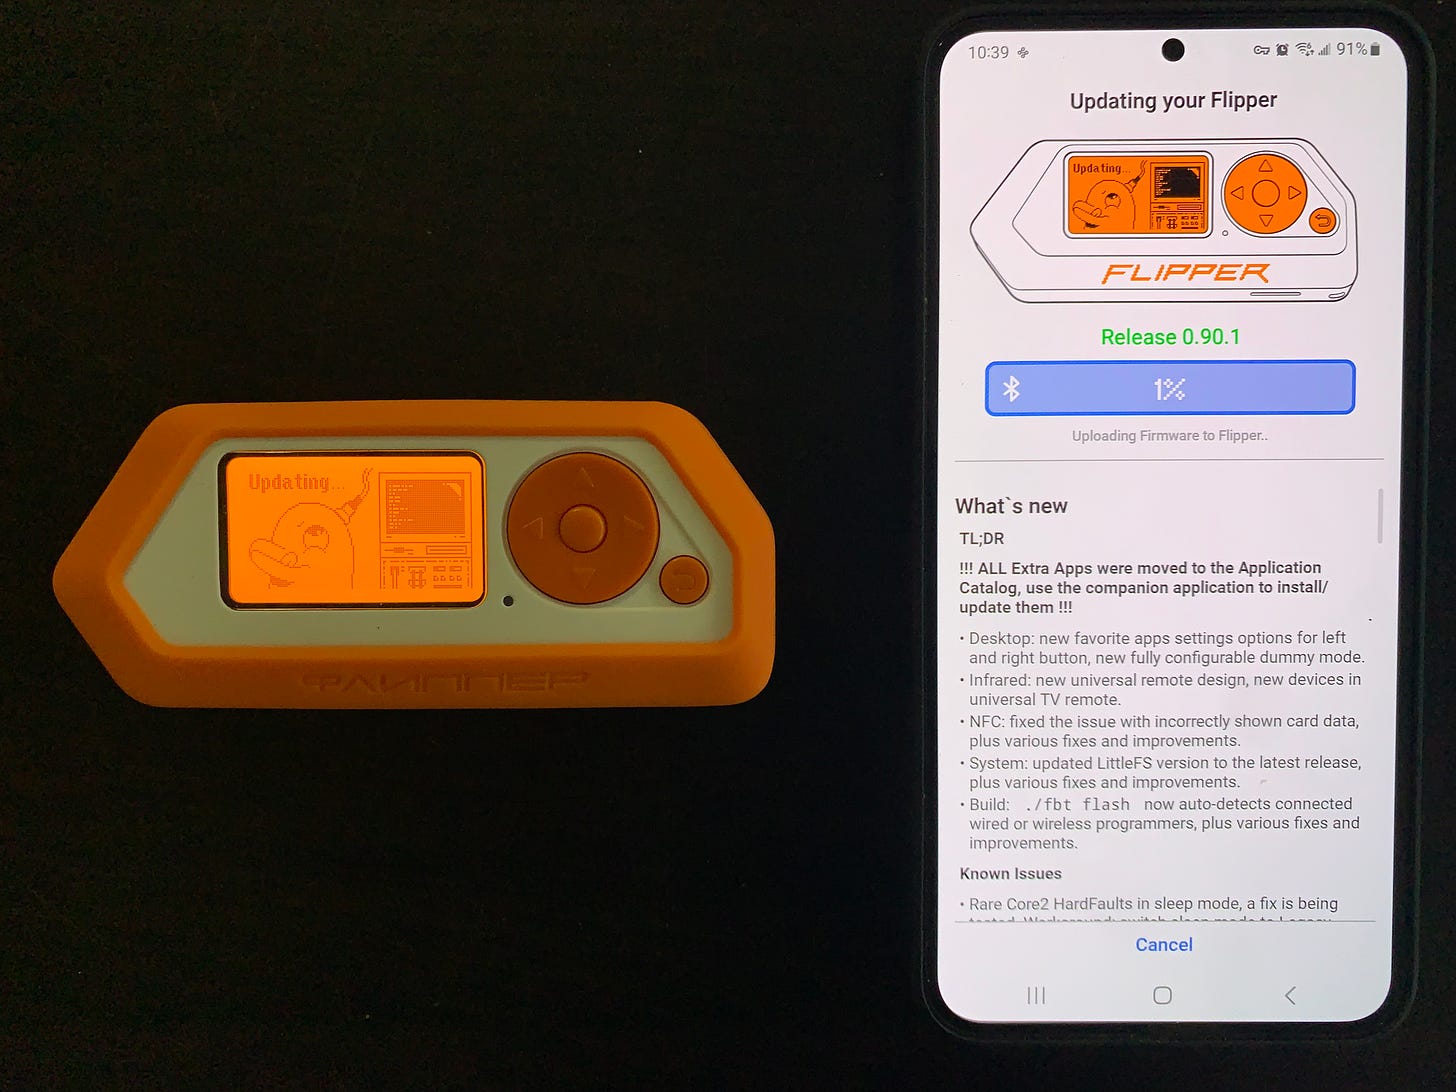 A photo of a Flipper Zero device with an orange case being updated by an Android phone next to the device.